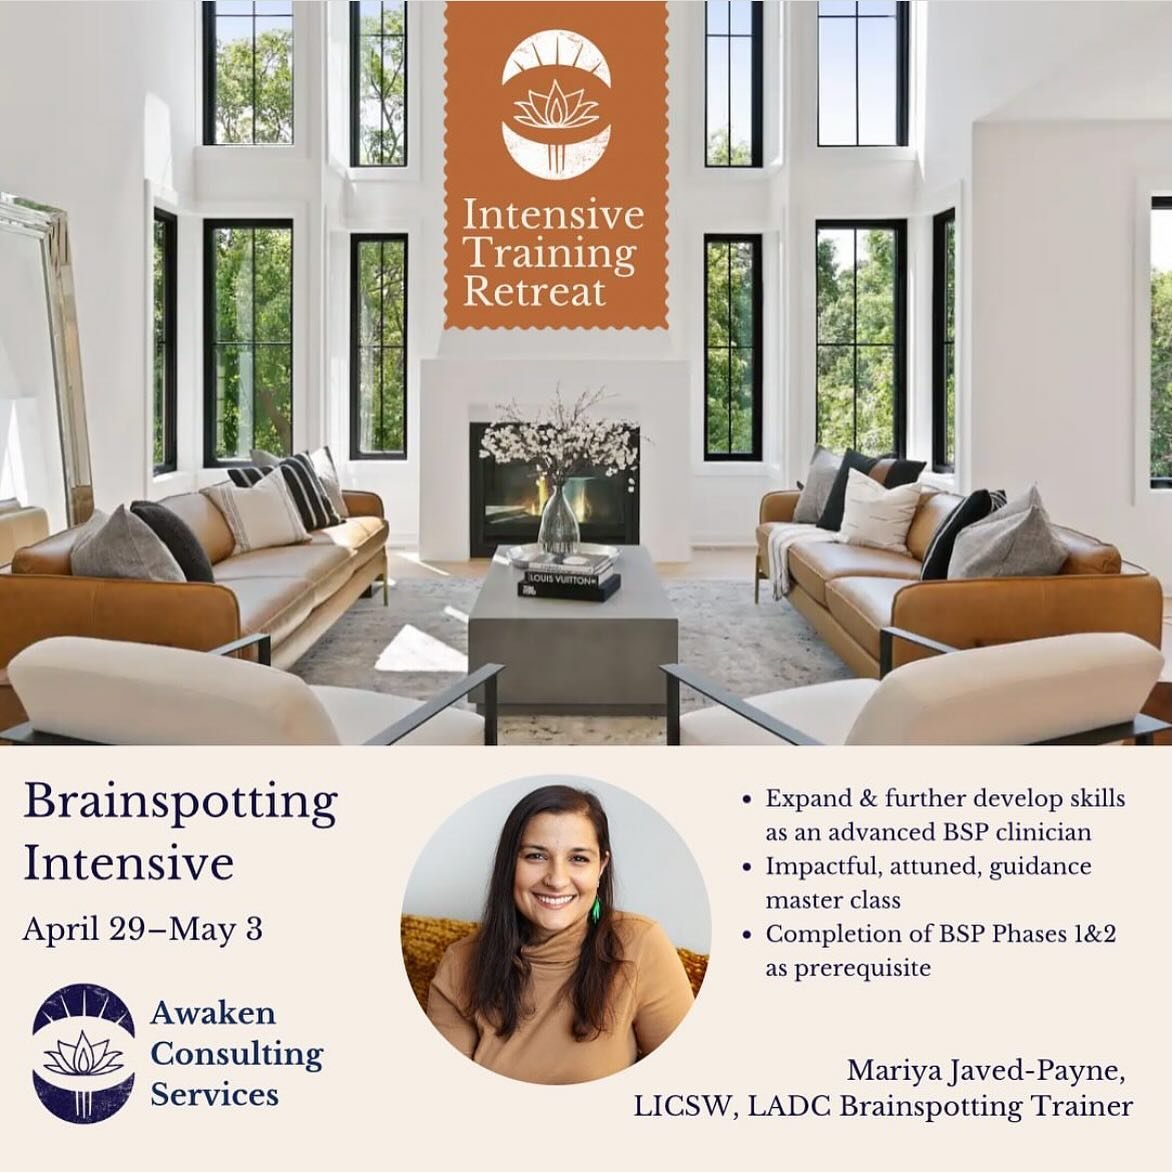 ✨One Spot Left!✨ Rejuvenate yourself this spring and join nine other clinicians and myself in an intimate Brainspotting intensive retreat at a beautiful location in Eden Prairie Minnesota&mdash;a 5 day deep dive to expand your skills and work on your